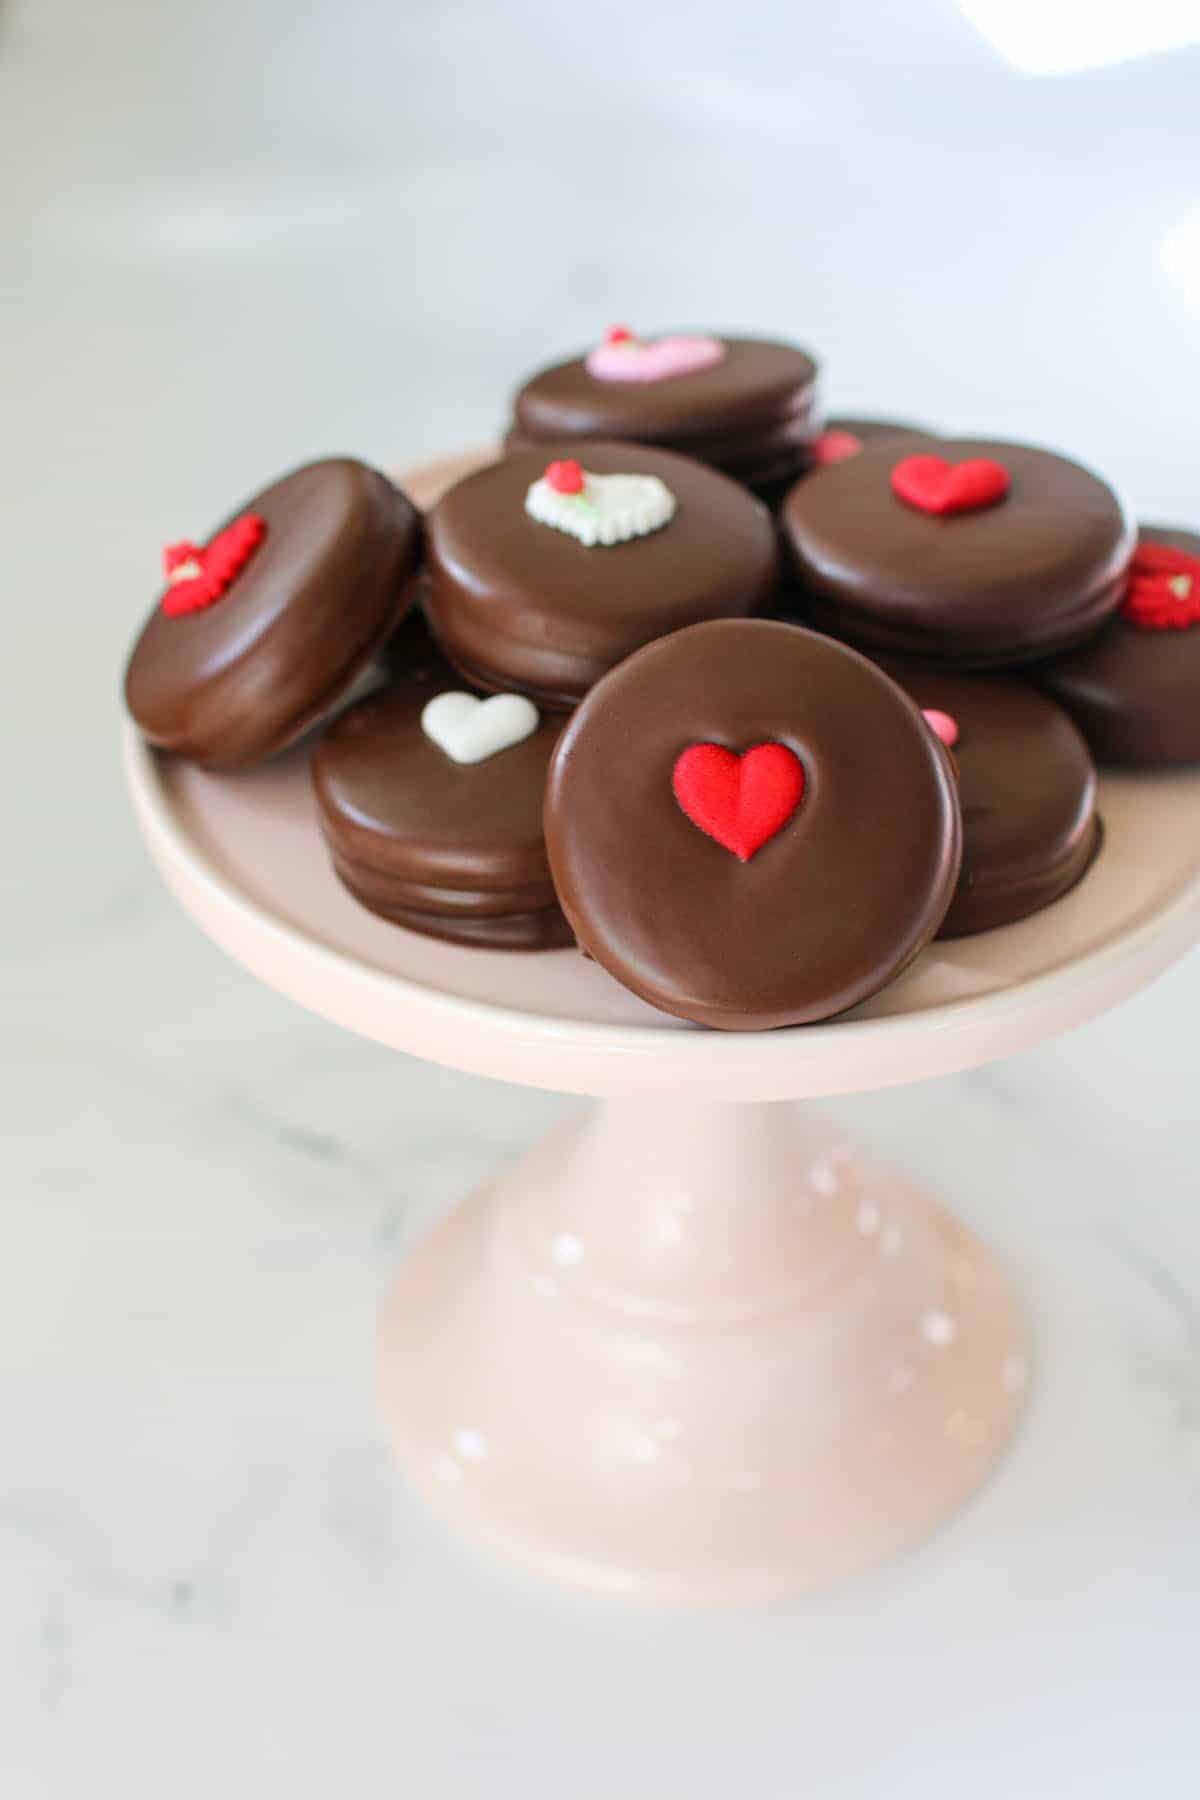 Chocolate covered Oreo cookies with heart decorations on top on a light pink cake stand on a white marble background.